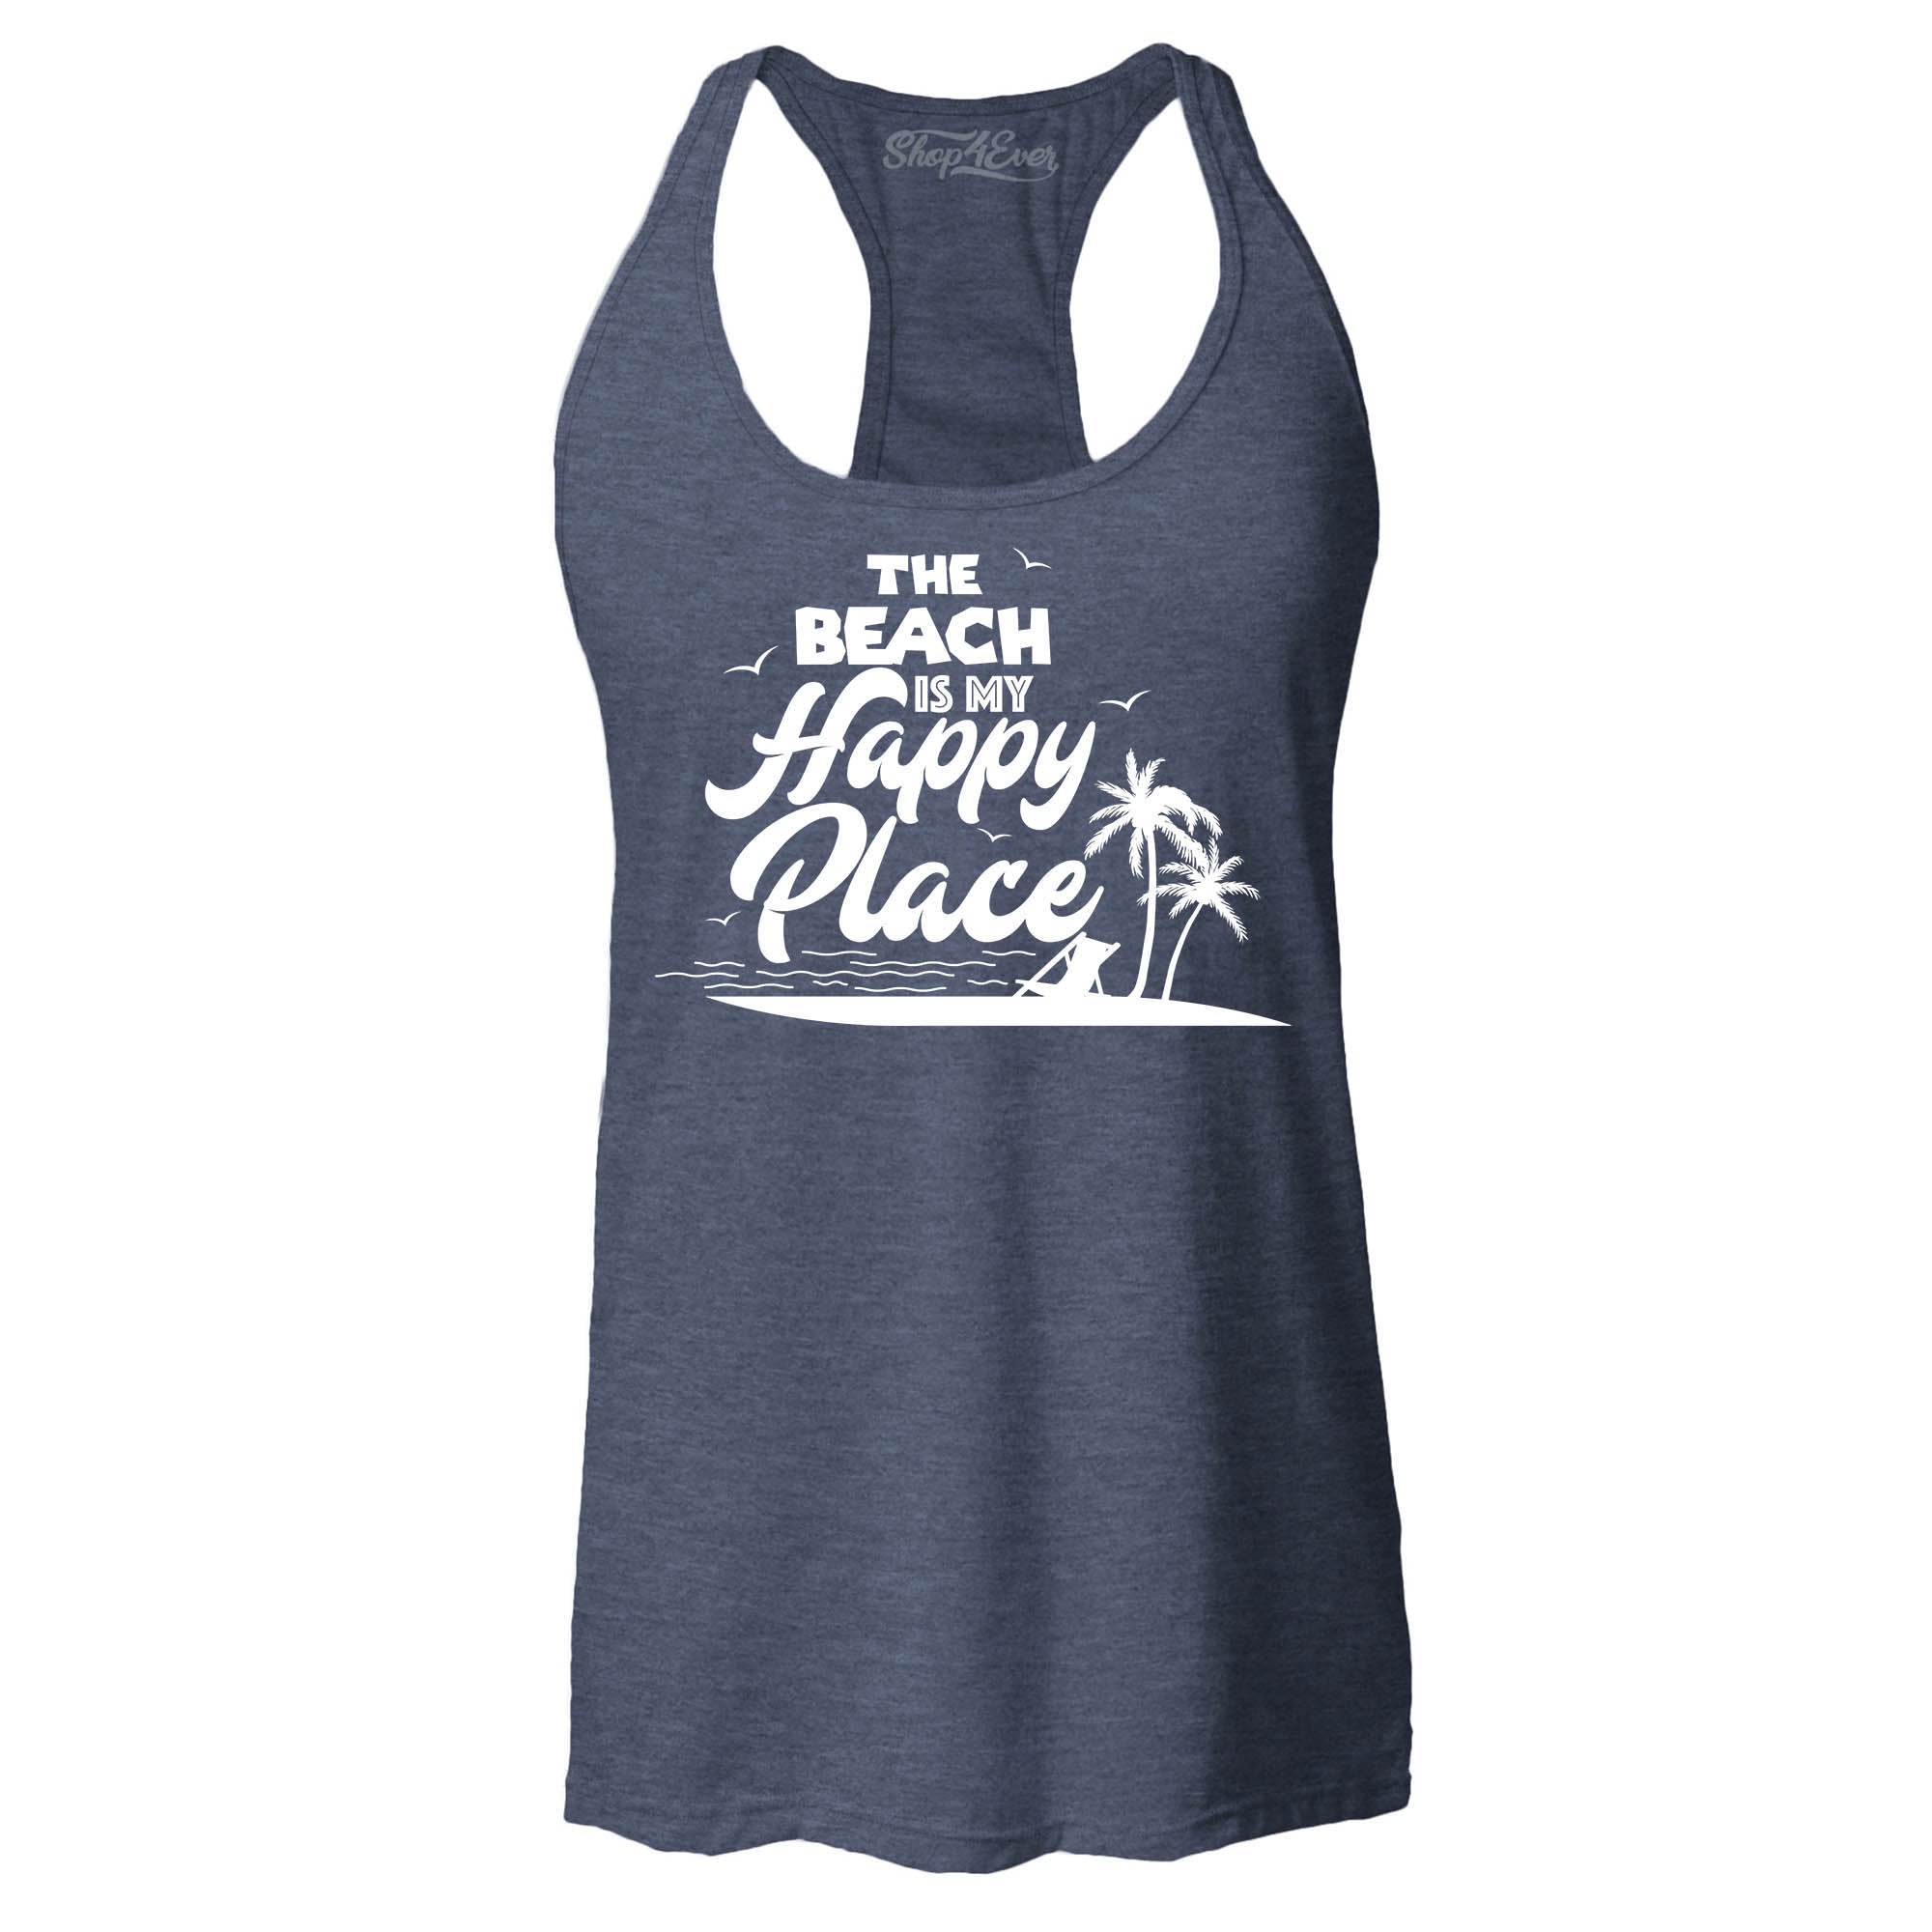 The Beach is My Happy Place Women's Racerback Tank Top Slim Fit